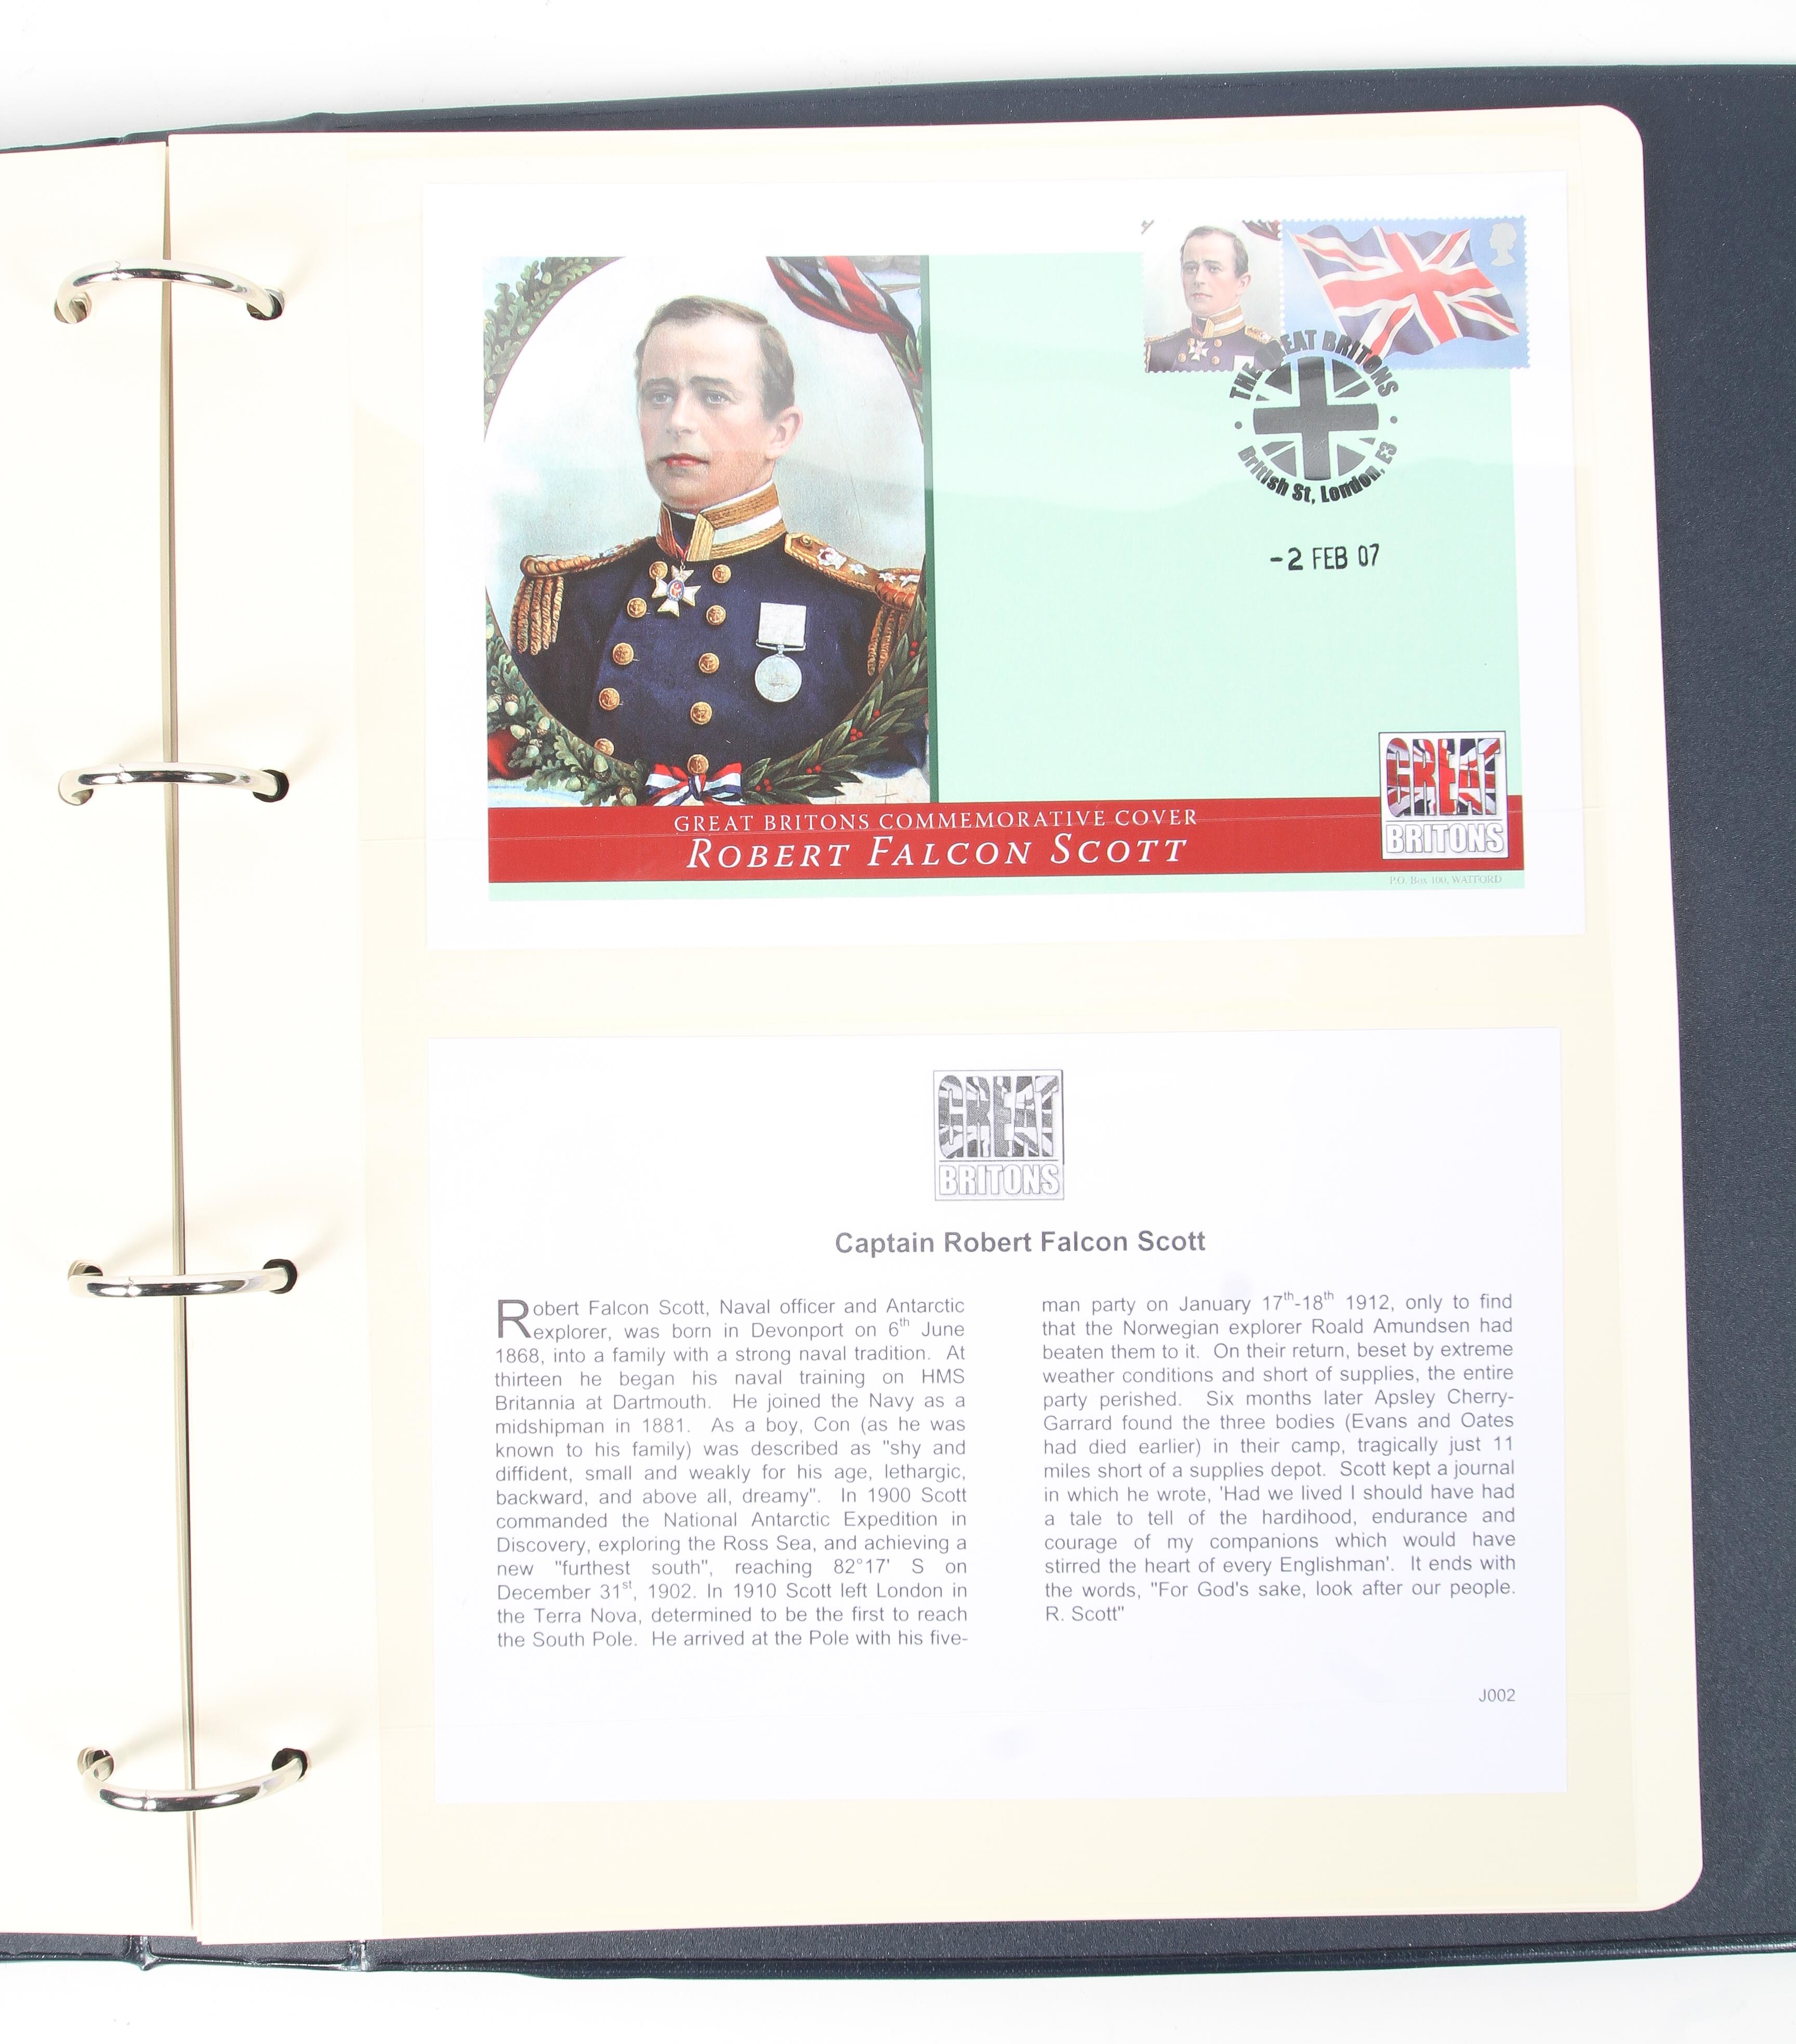 A folder of The Great Britons Commemorative Stamp and Cover Collection - Image 3 of 4